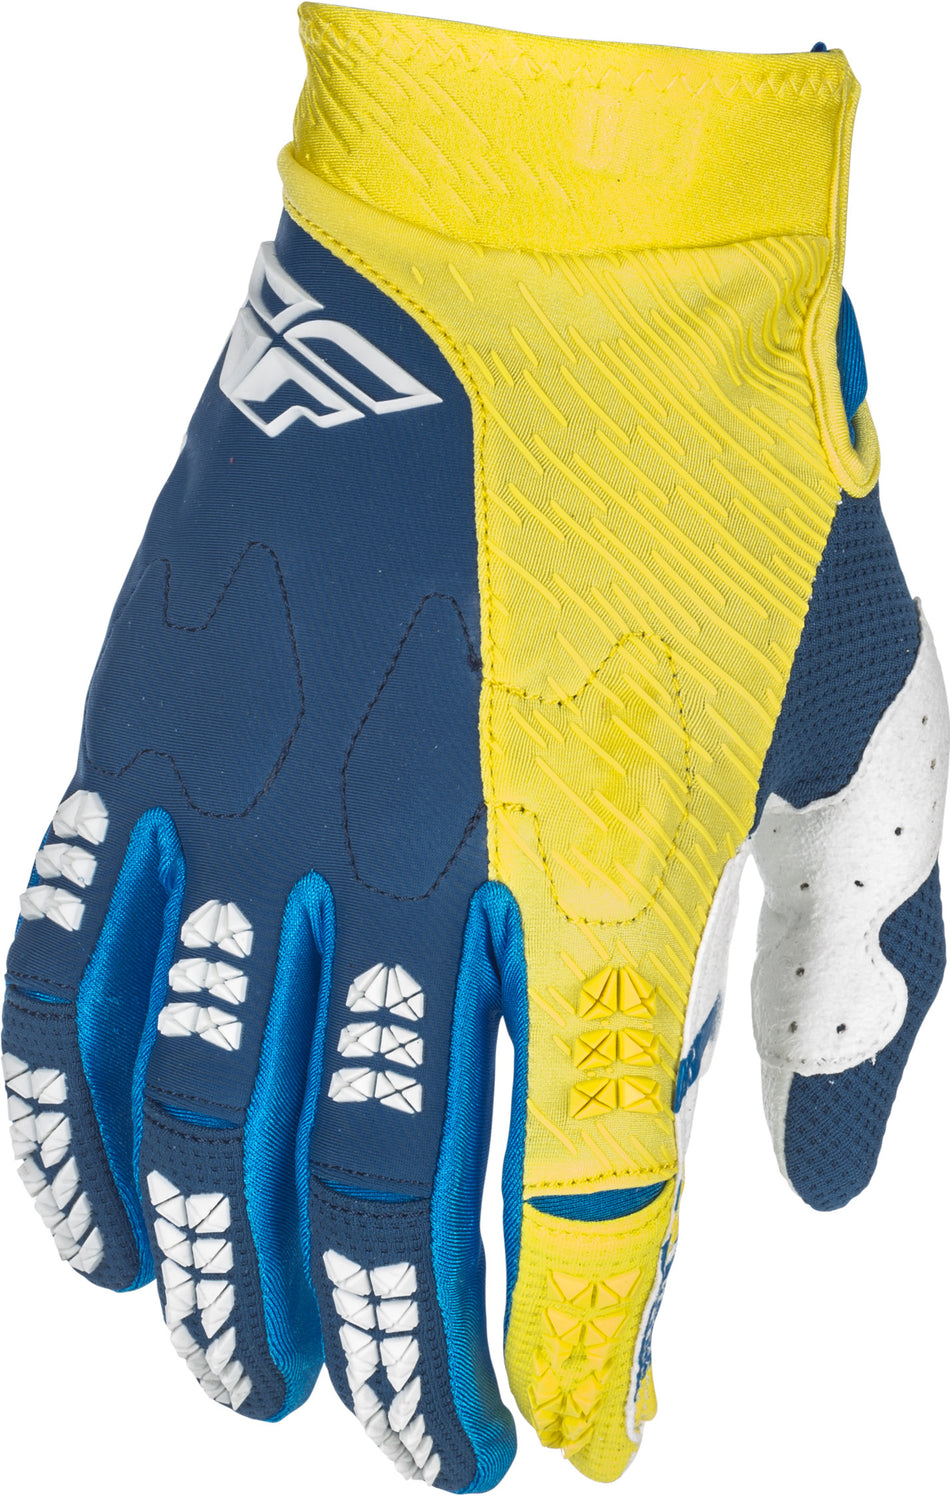 FLY RACING Evolution 2.0 Gloves Navy/Yellow Sz 10 371-11110